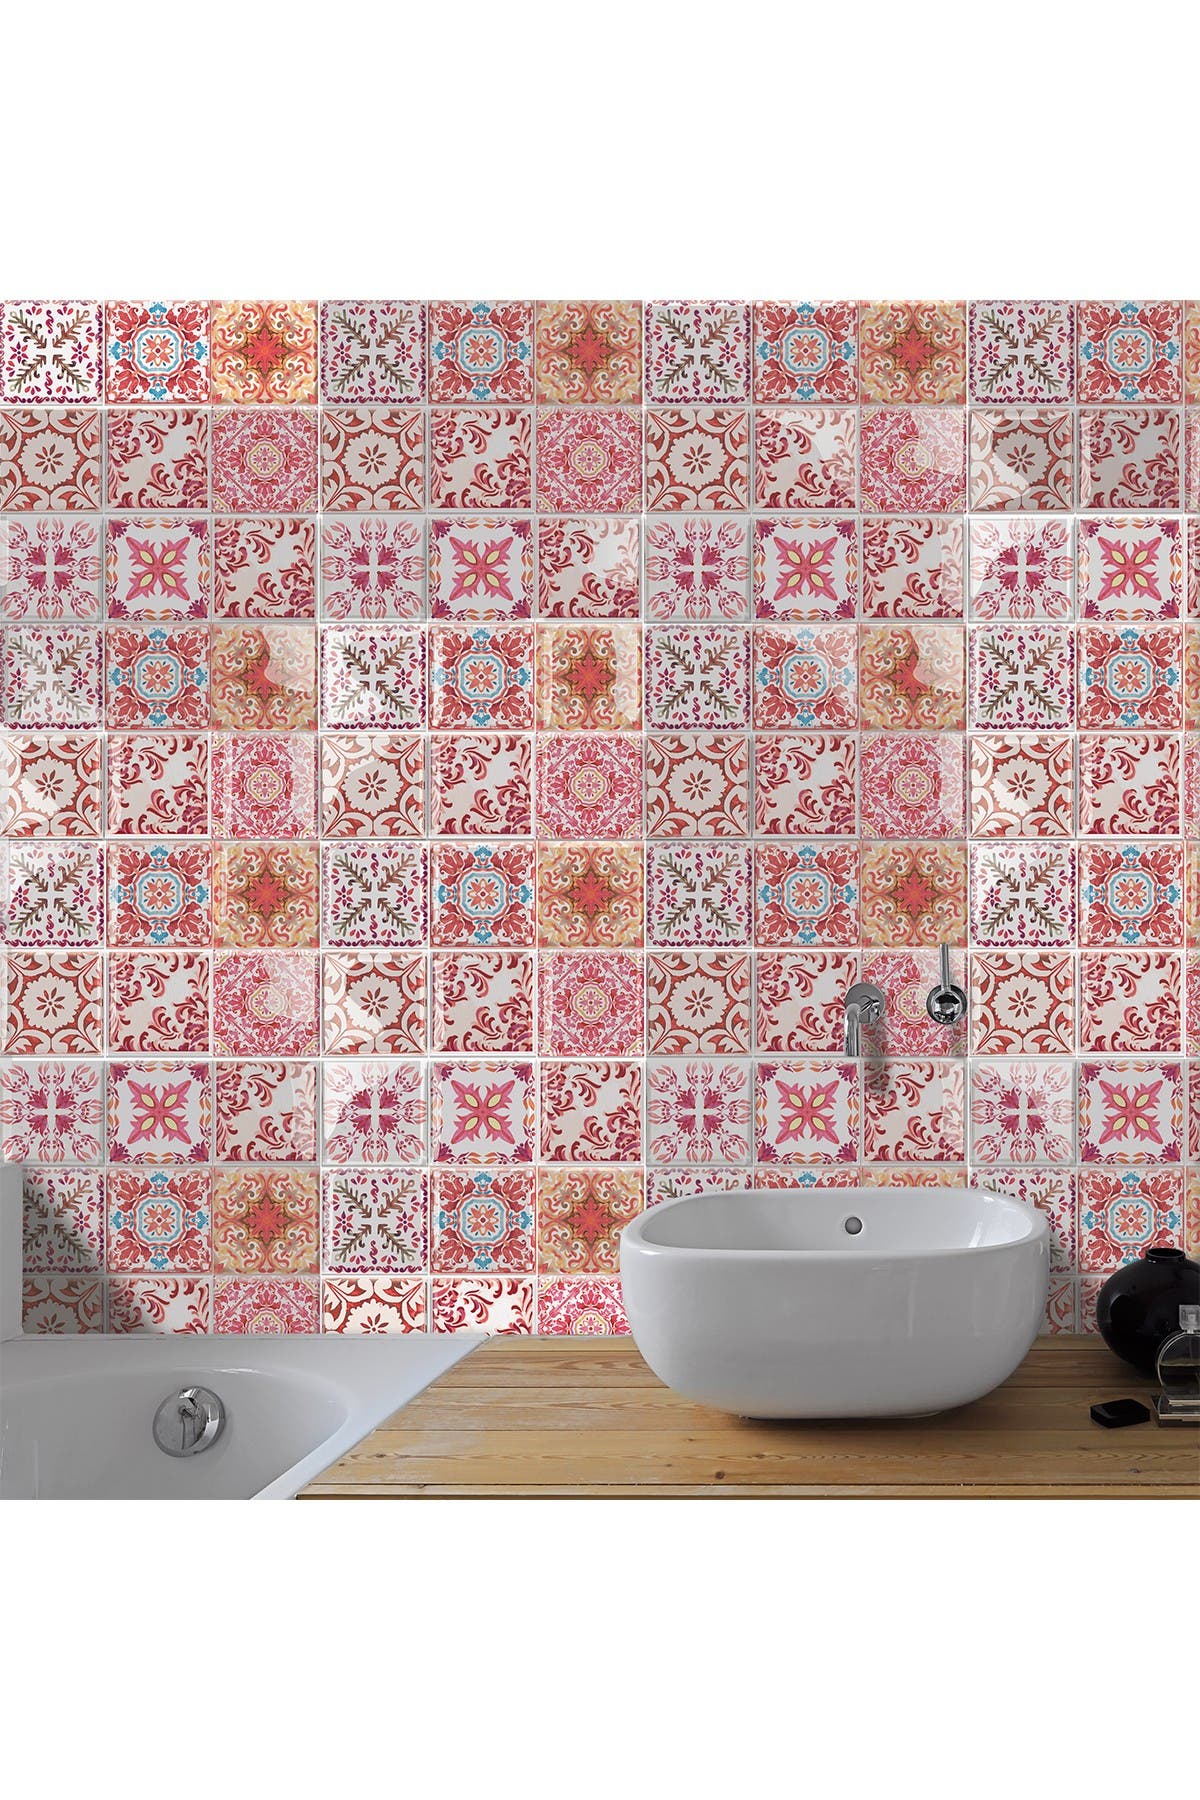 Walplus Moroccan Rose Red Mosaic Glossy 3d Sticker Tile 15.4 Cm (6 In) In Open Miscellaneous